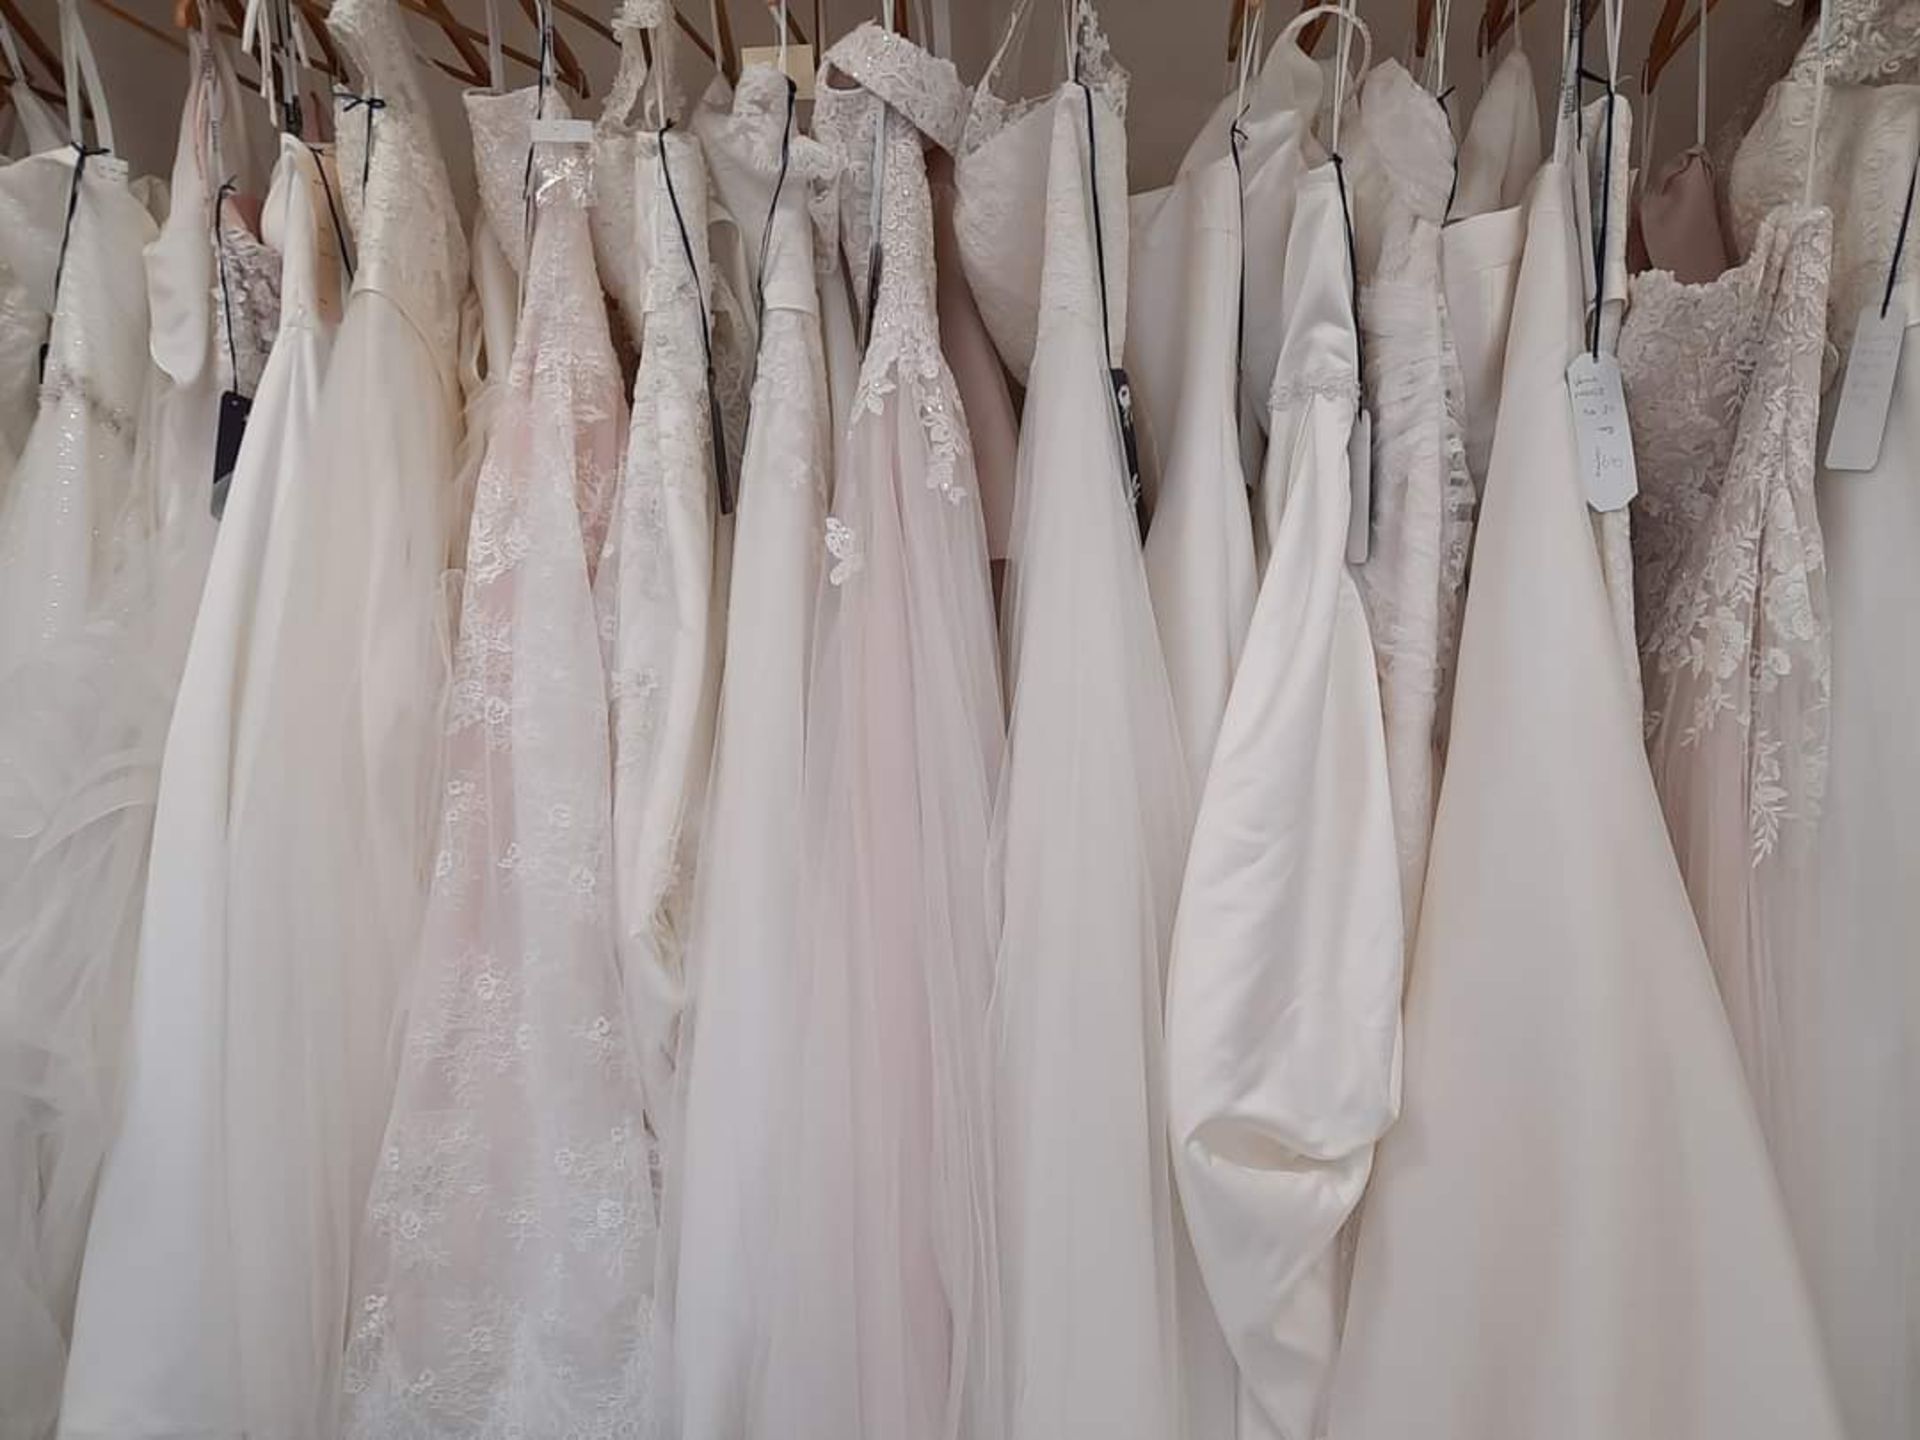 Bulk Lot of 25 Wedding Gowns/Skirts/Bodices All Mixed Sizes and Designs. RRP £25k etx. Mainly Iv...